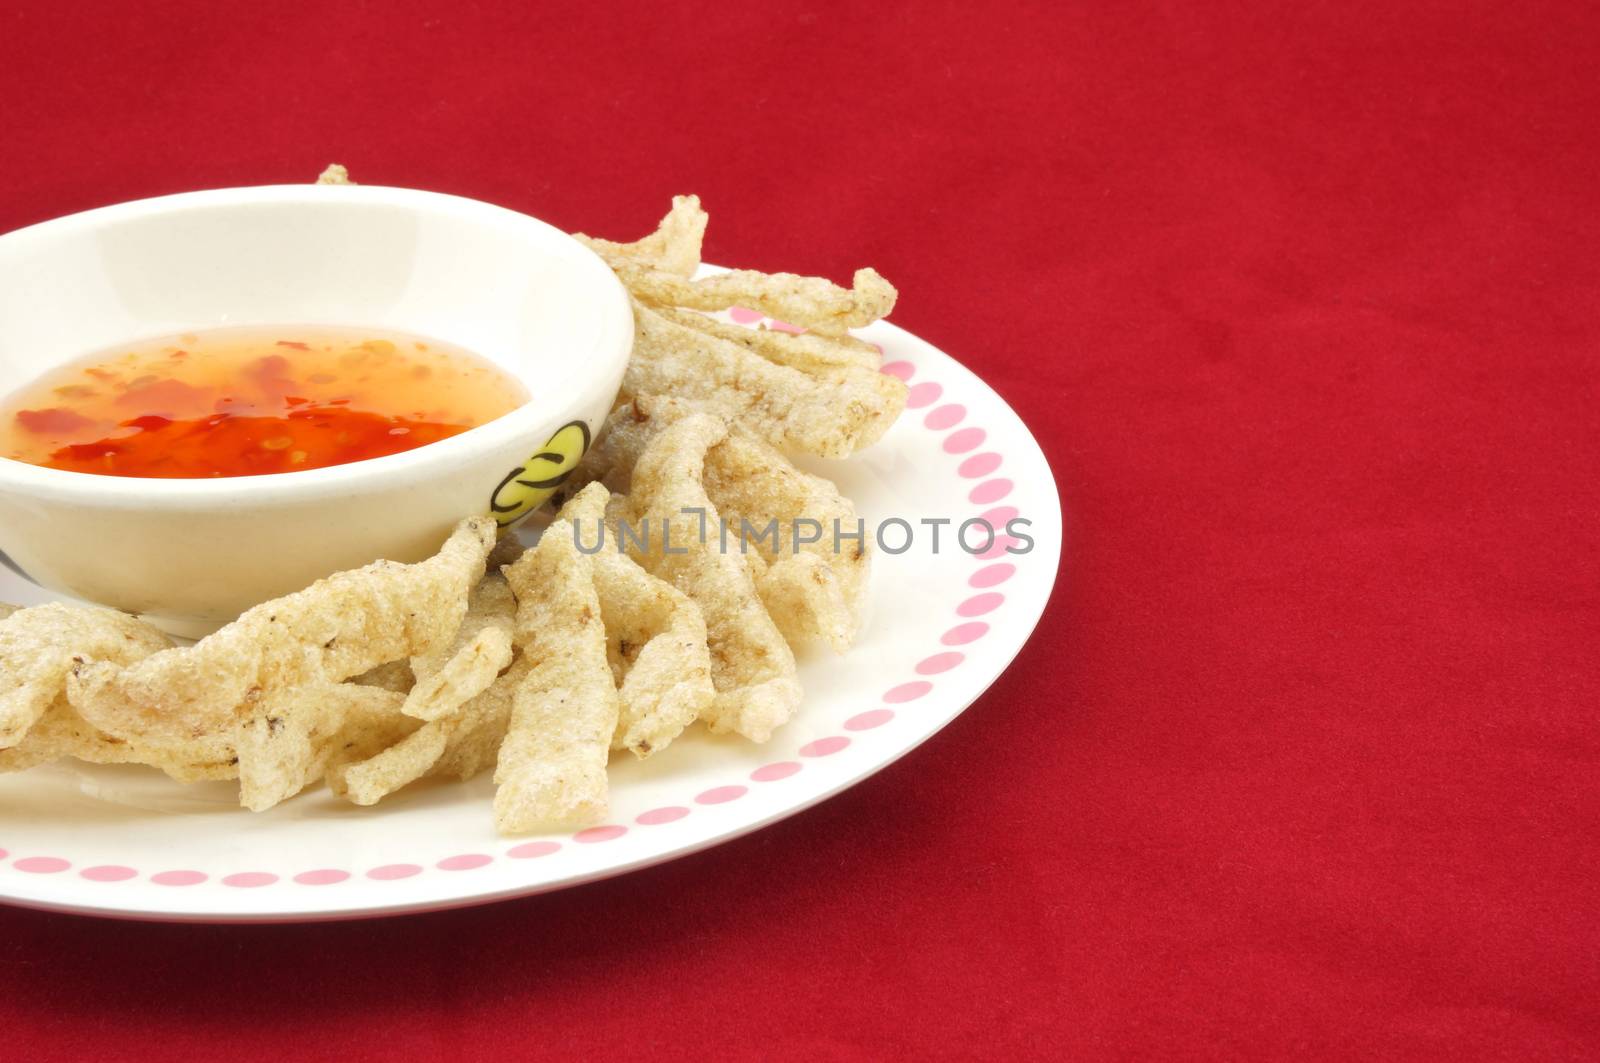 Shiitake mushroom snack in plate with chilli sauce placed on a red background.